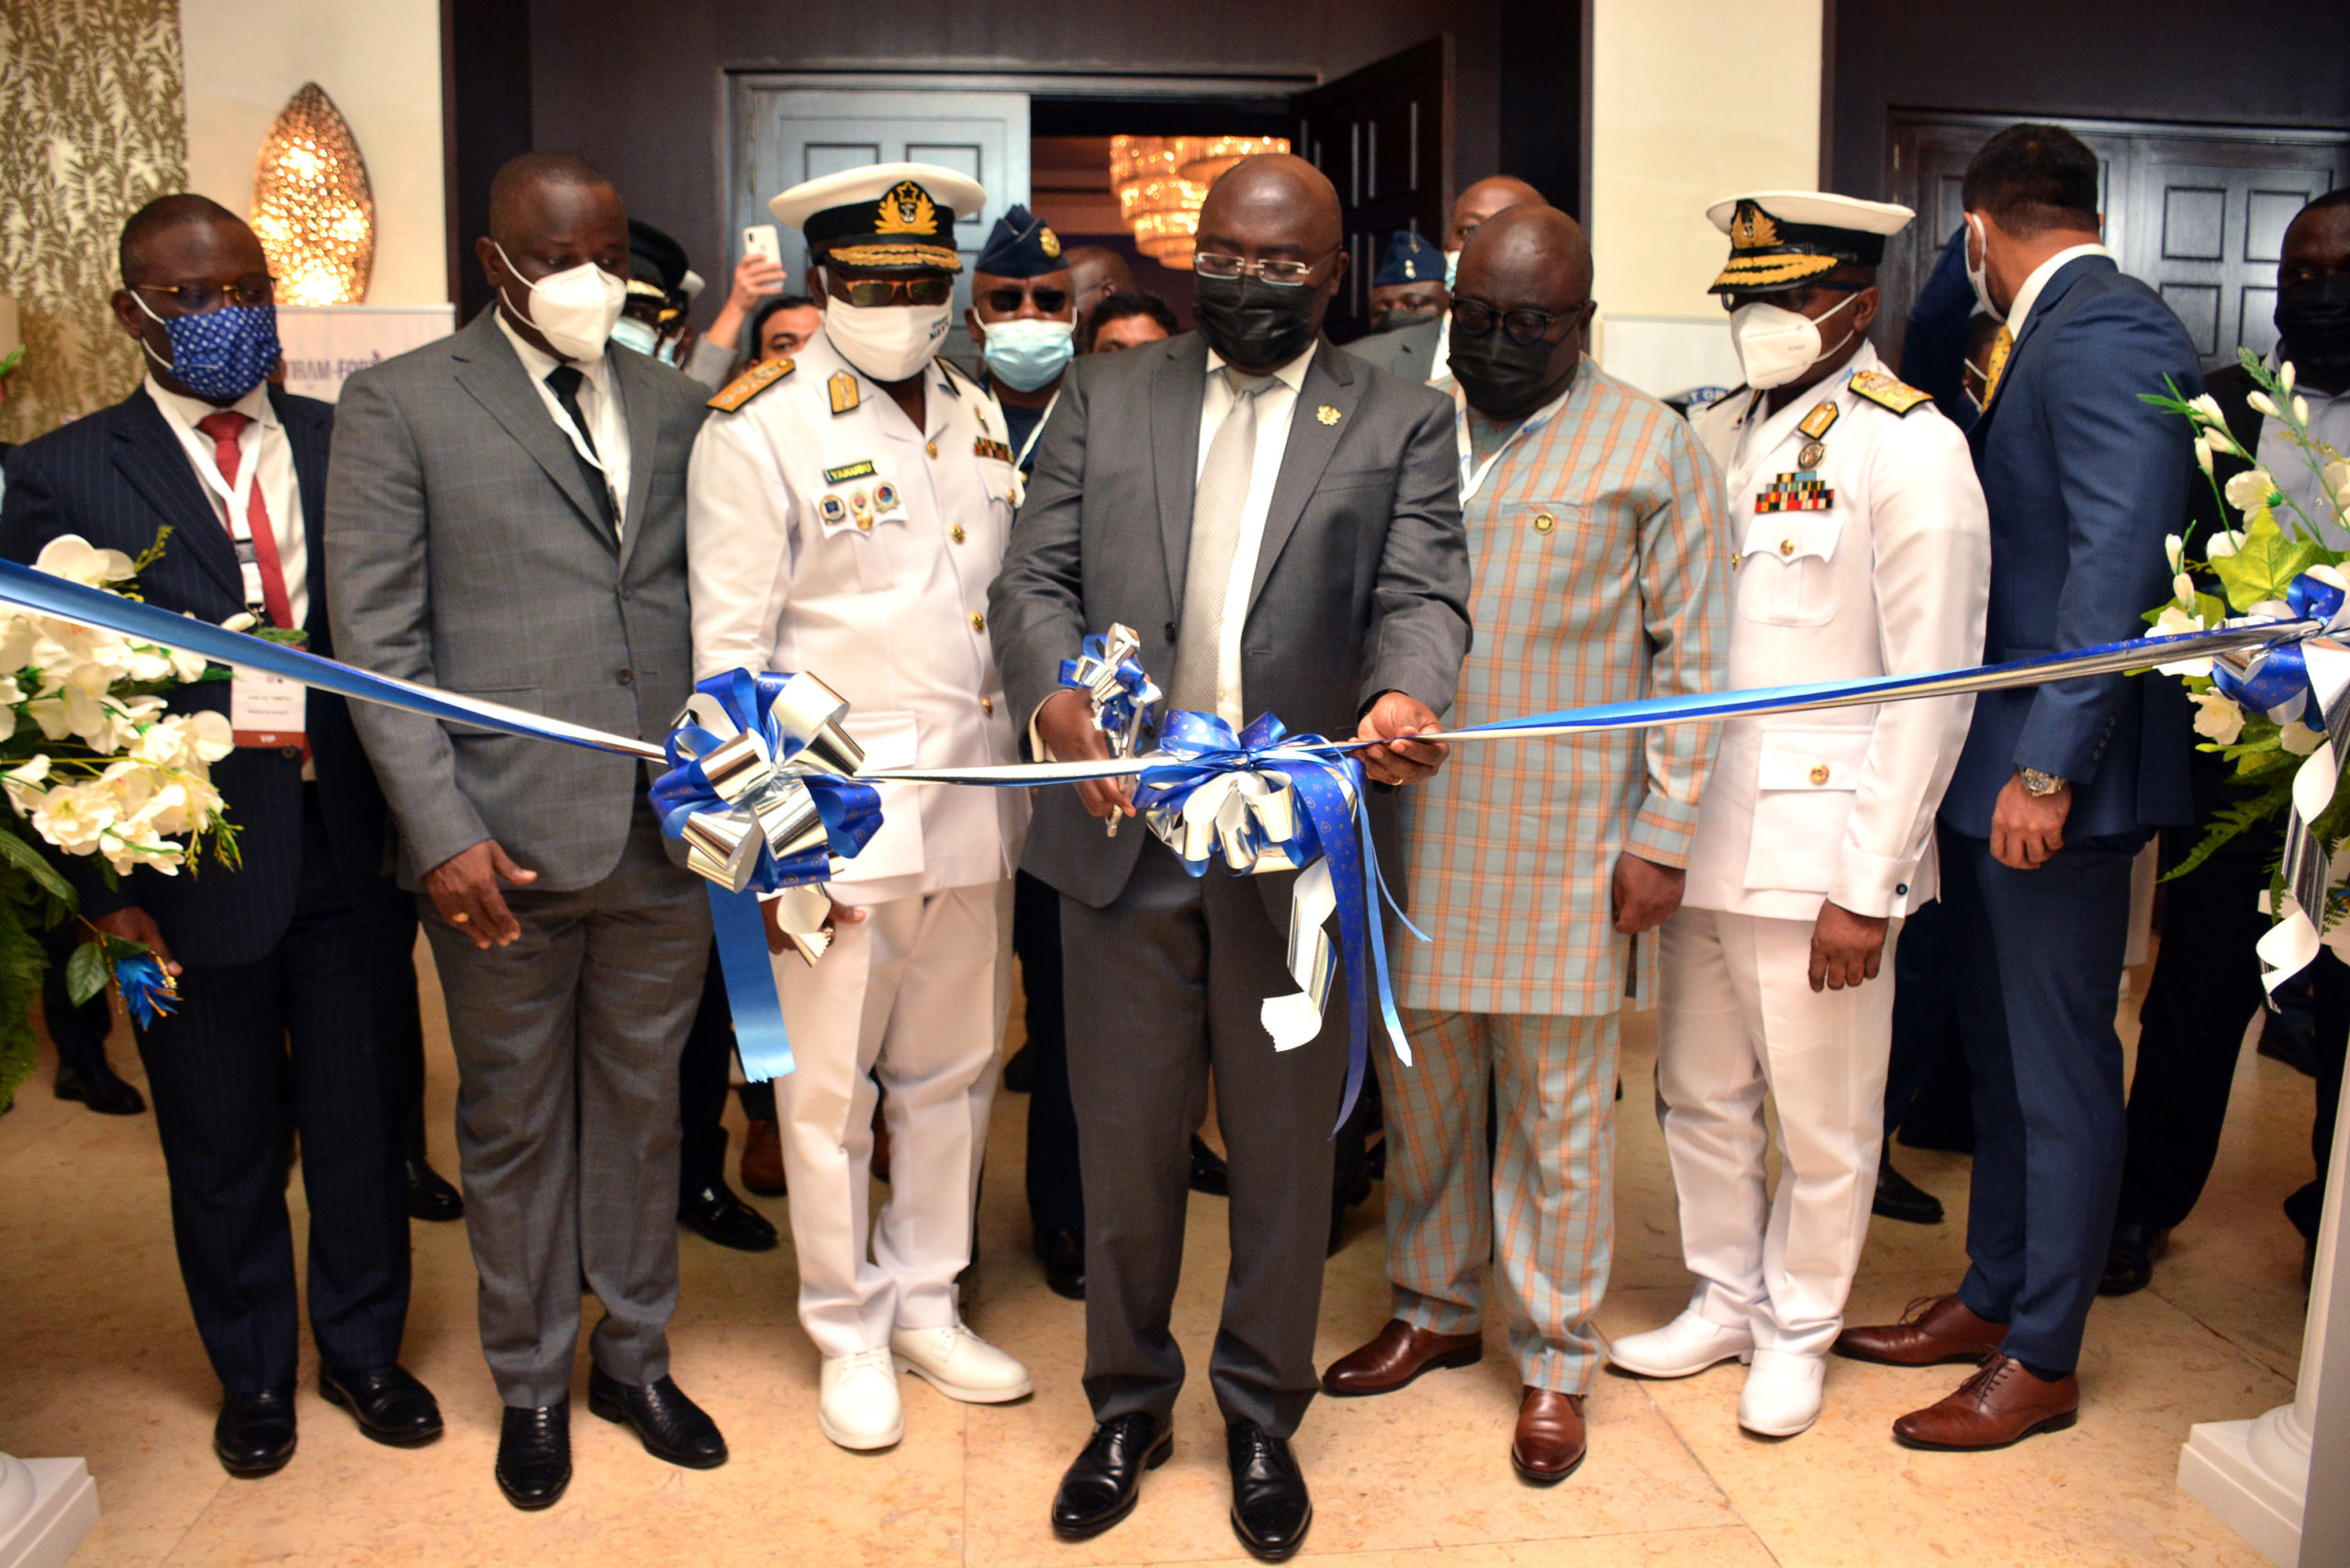 International Naval and Air Forces Leaders speaking at the 2nd International Maritime Defence Exhibition and Conference in Accra 7-8 July